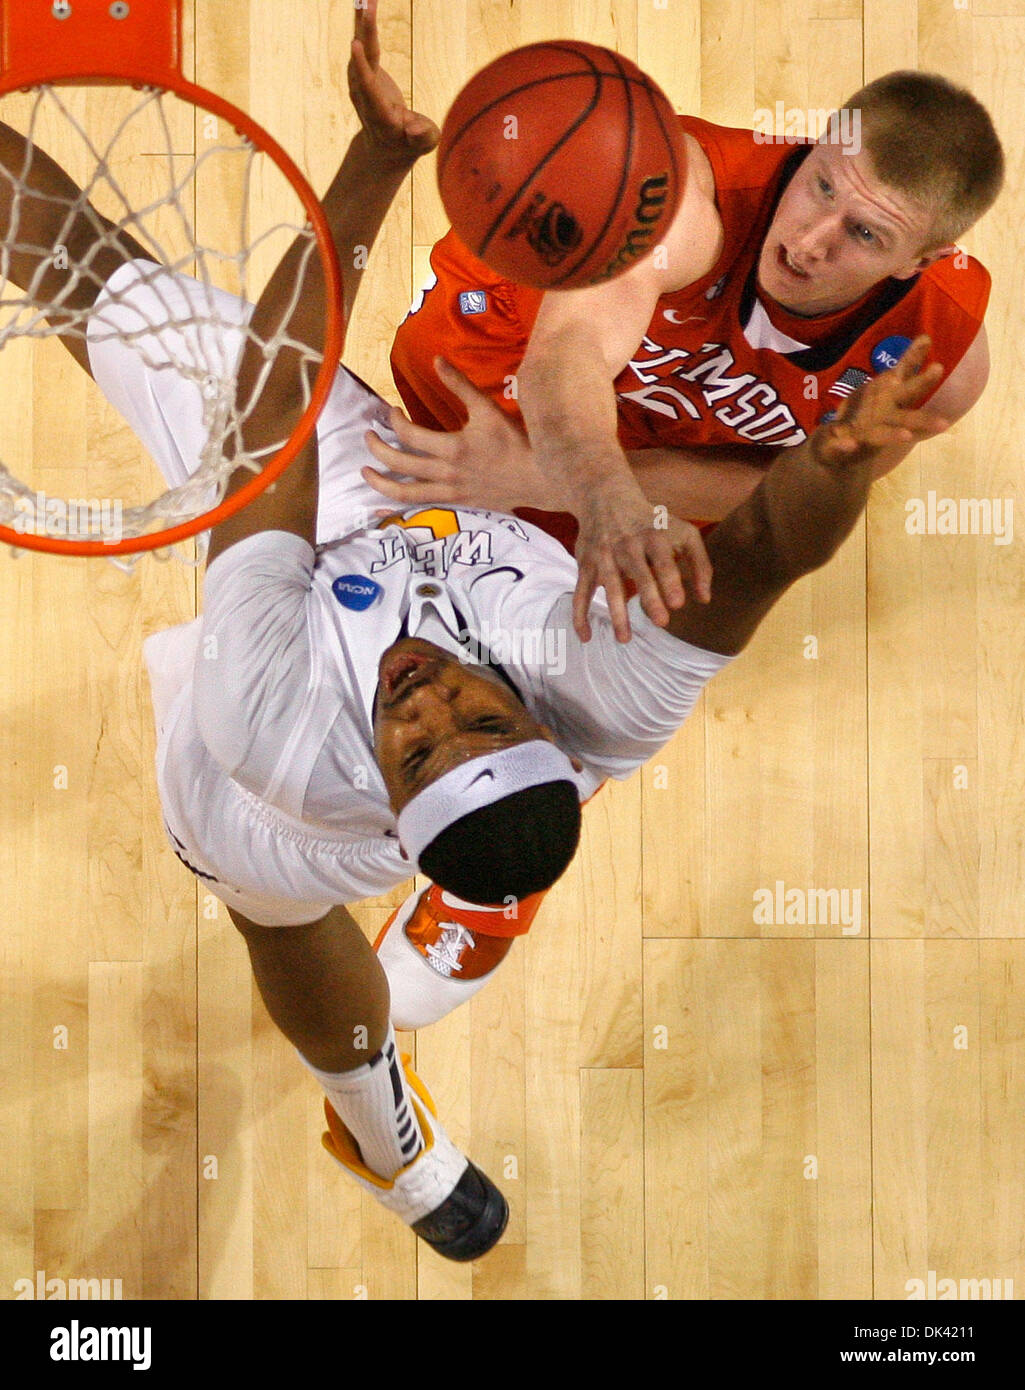 Mar. 17, 2011 - Tampa, FL - DIRK SHADD   |  Times .TP 335794 SHAD WVU 16 (03/17/11 TAMPA) West Virginia's Kevin Jones (5) battles for the ball under the net against Clemson's Tanner Smith (5)) during action at the 2011 NCAA Tournament second round games at the St. Pete Times Forum in Tampa Thursday afternoon (03/17/11).  [DIRK SHADD, Times] (Credit Image: © St. Petersburg Times/ZUM Stock Photo